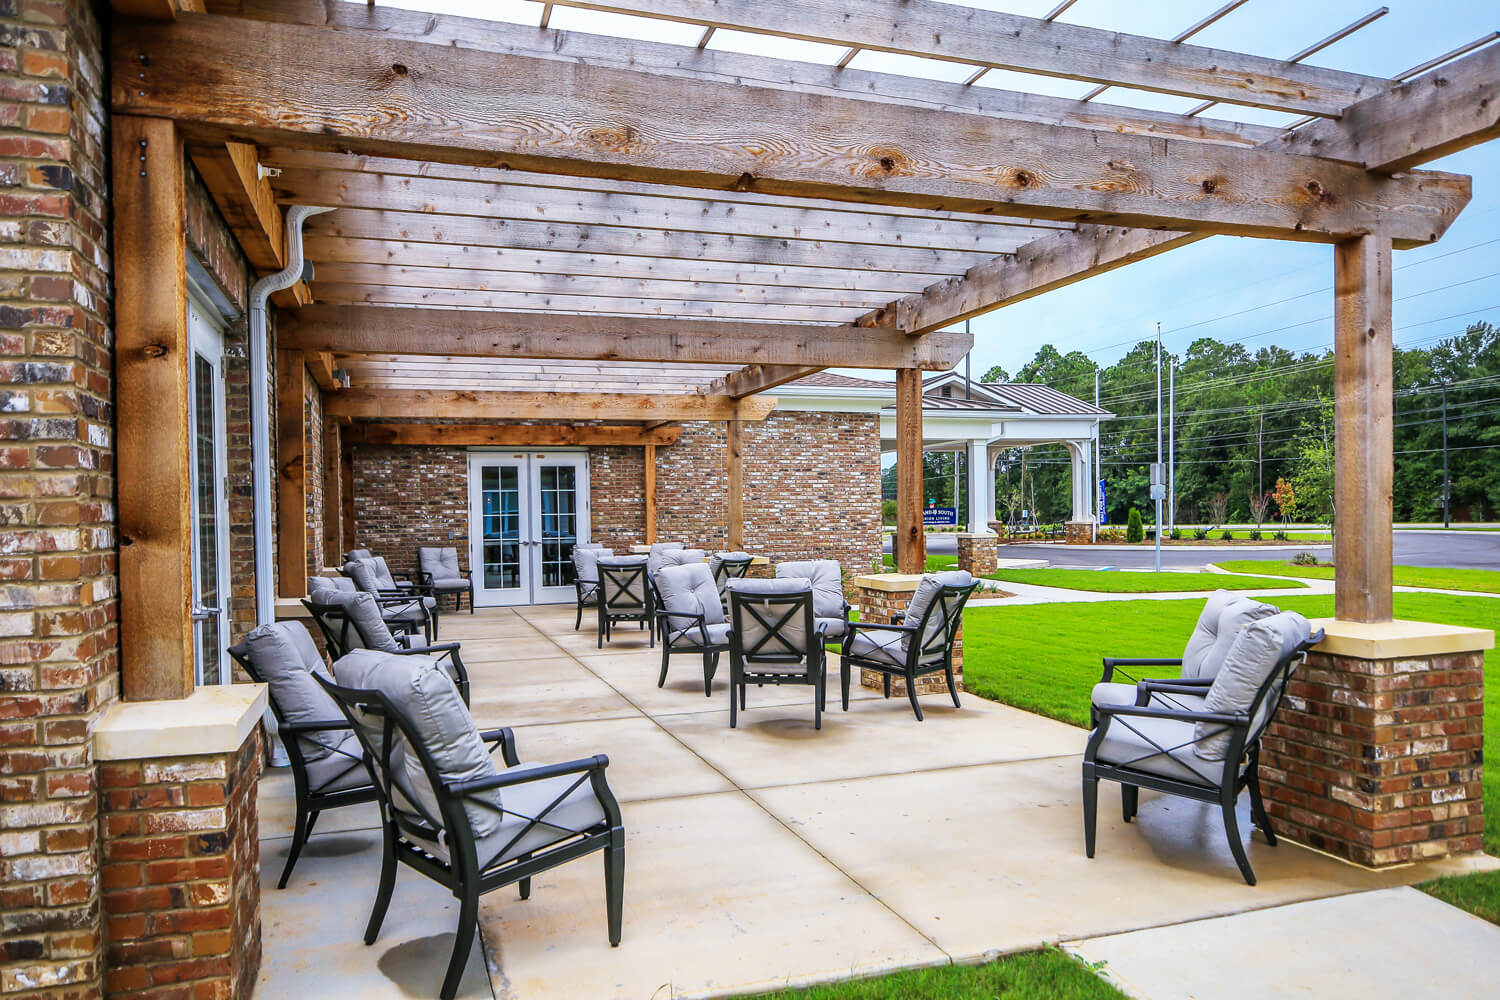 Grand South Senior Living - Front Porch - Designed by Foshee Architecture